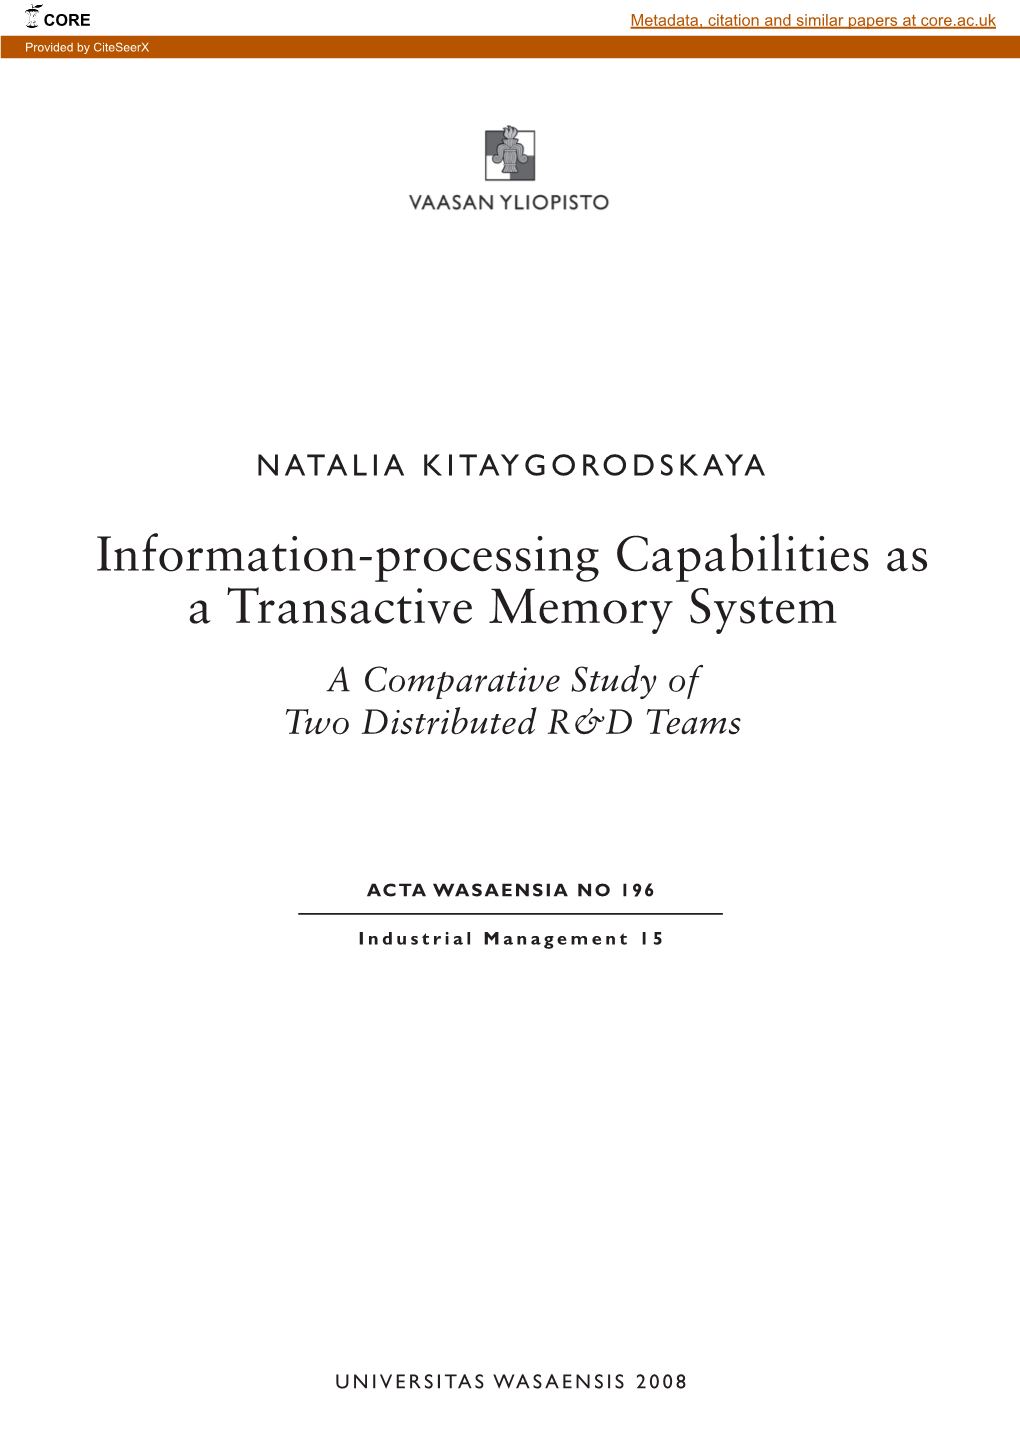 Information-Processing Capabilities As a Transactive Memory System a Comparative Study of Two Distributed R&D Teams